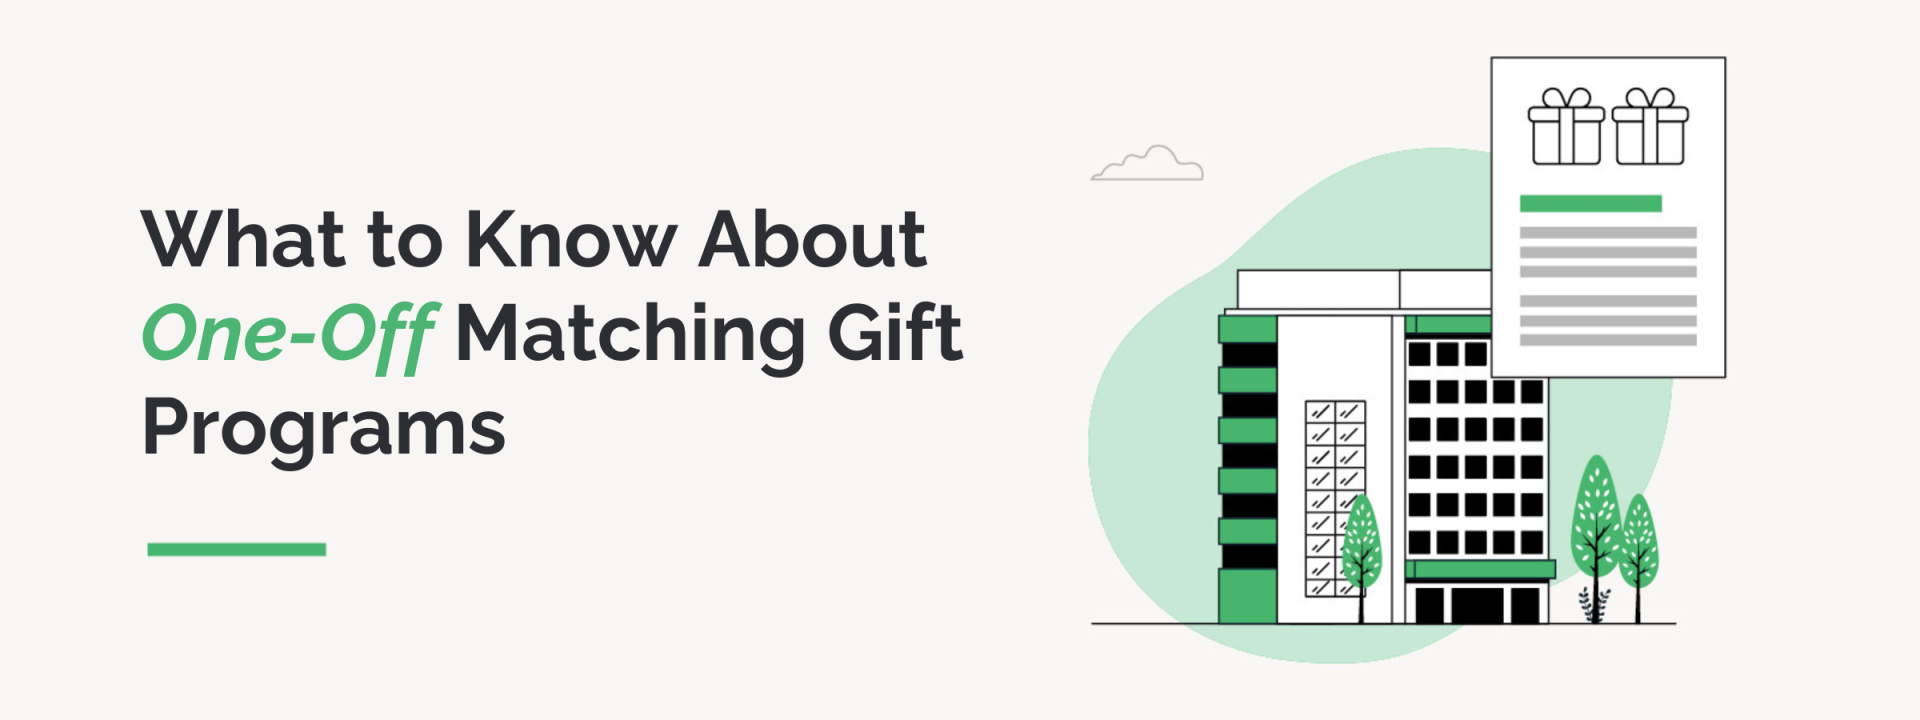 One-Off Matching Gift Programs | What to Know For Your Org